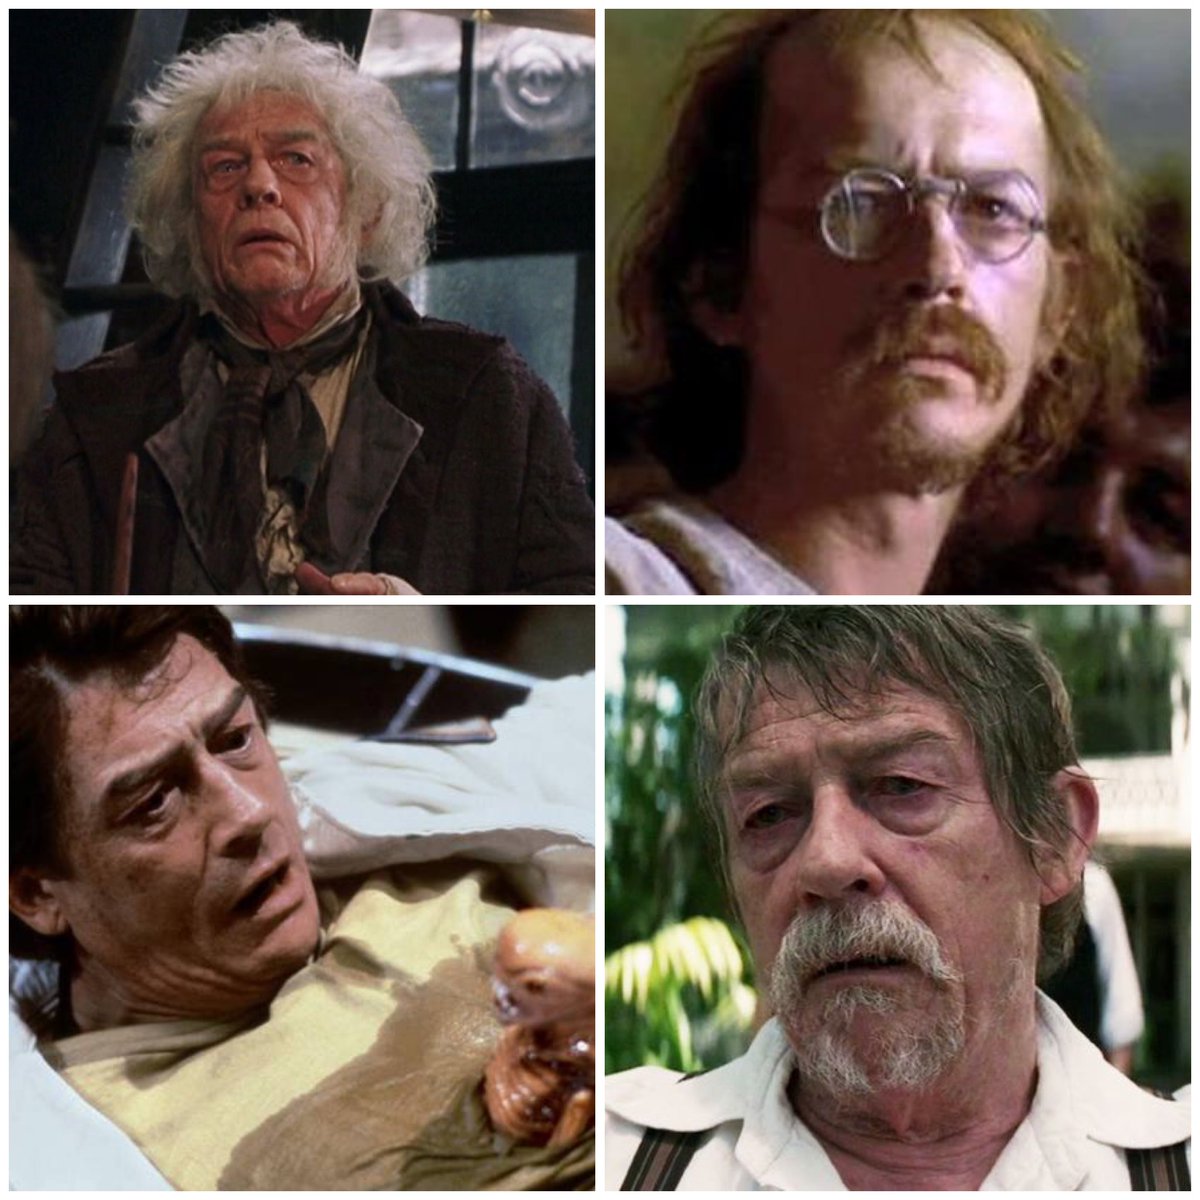 Happy birthday to Sir John Hurt 🎂 

The actor would have turned 84 today.

#JohnHurt